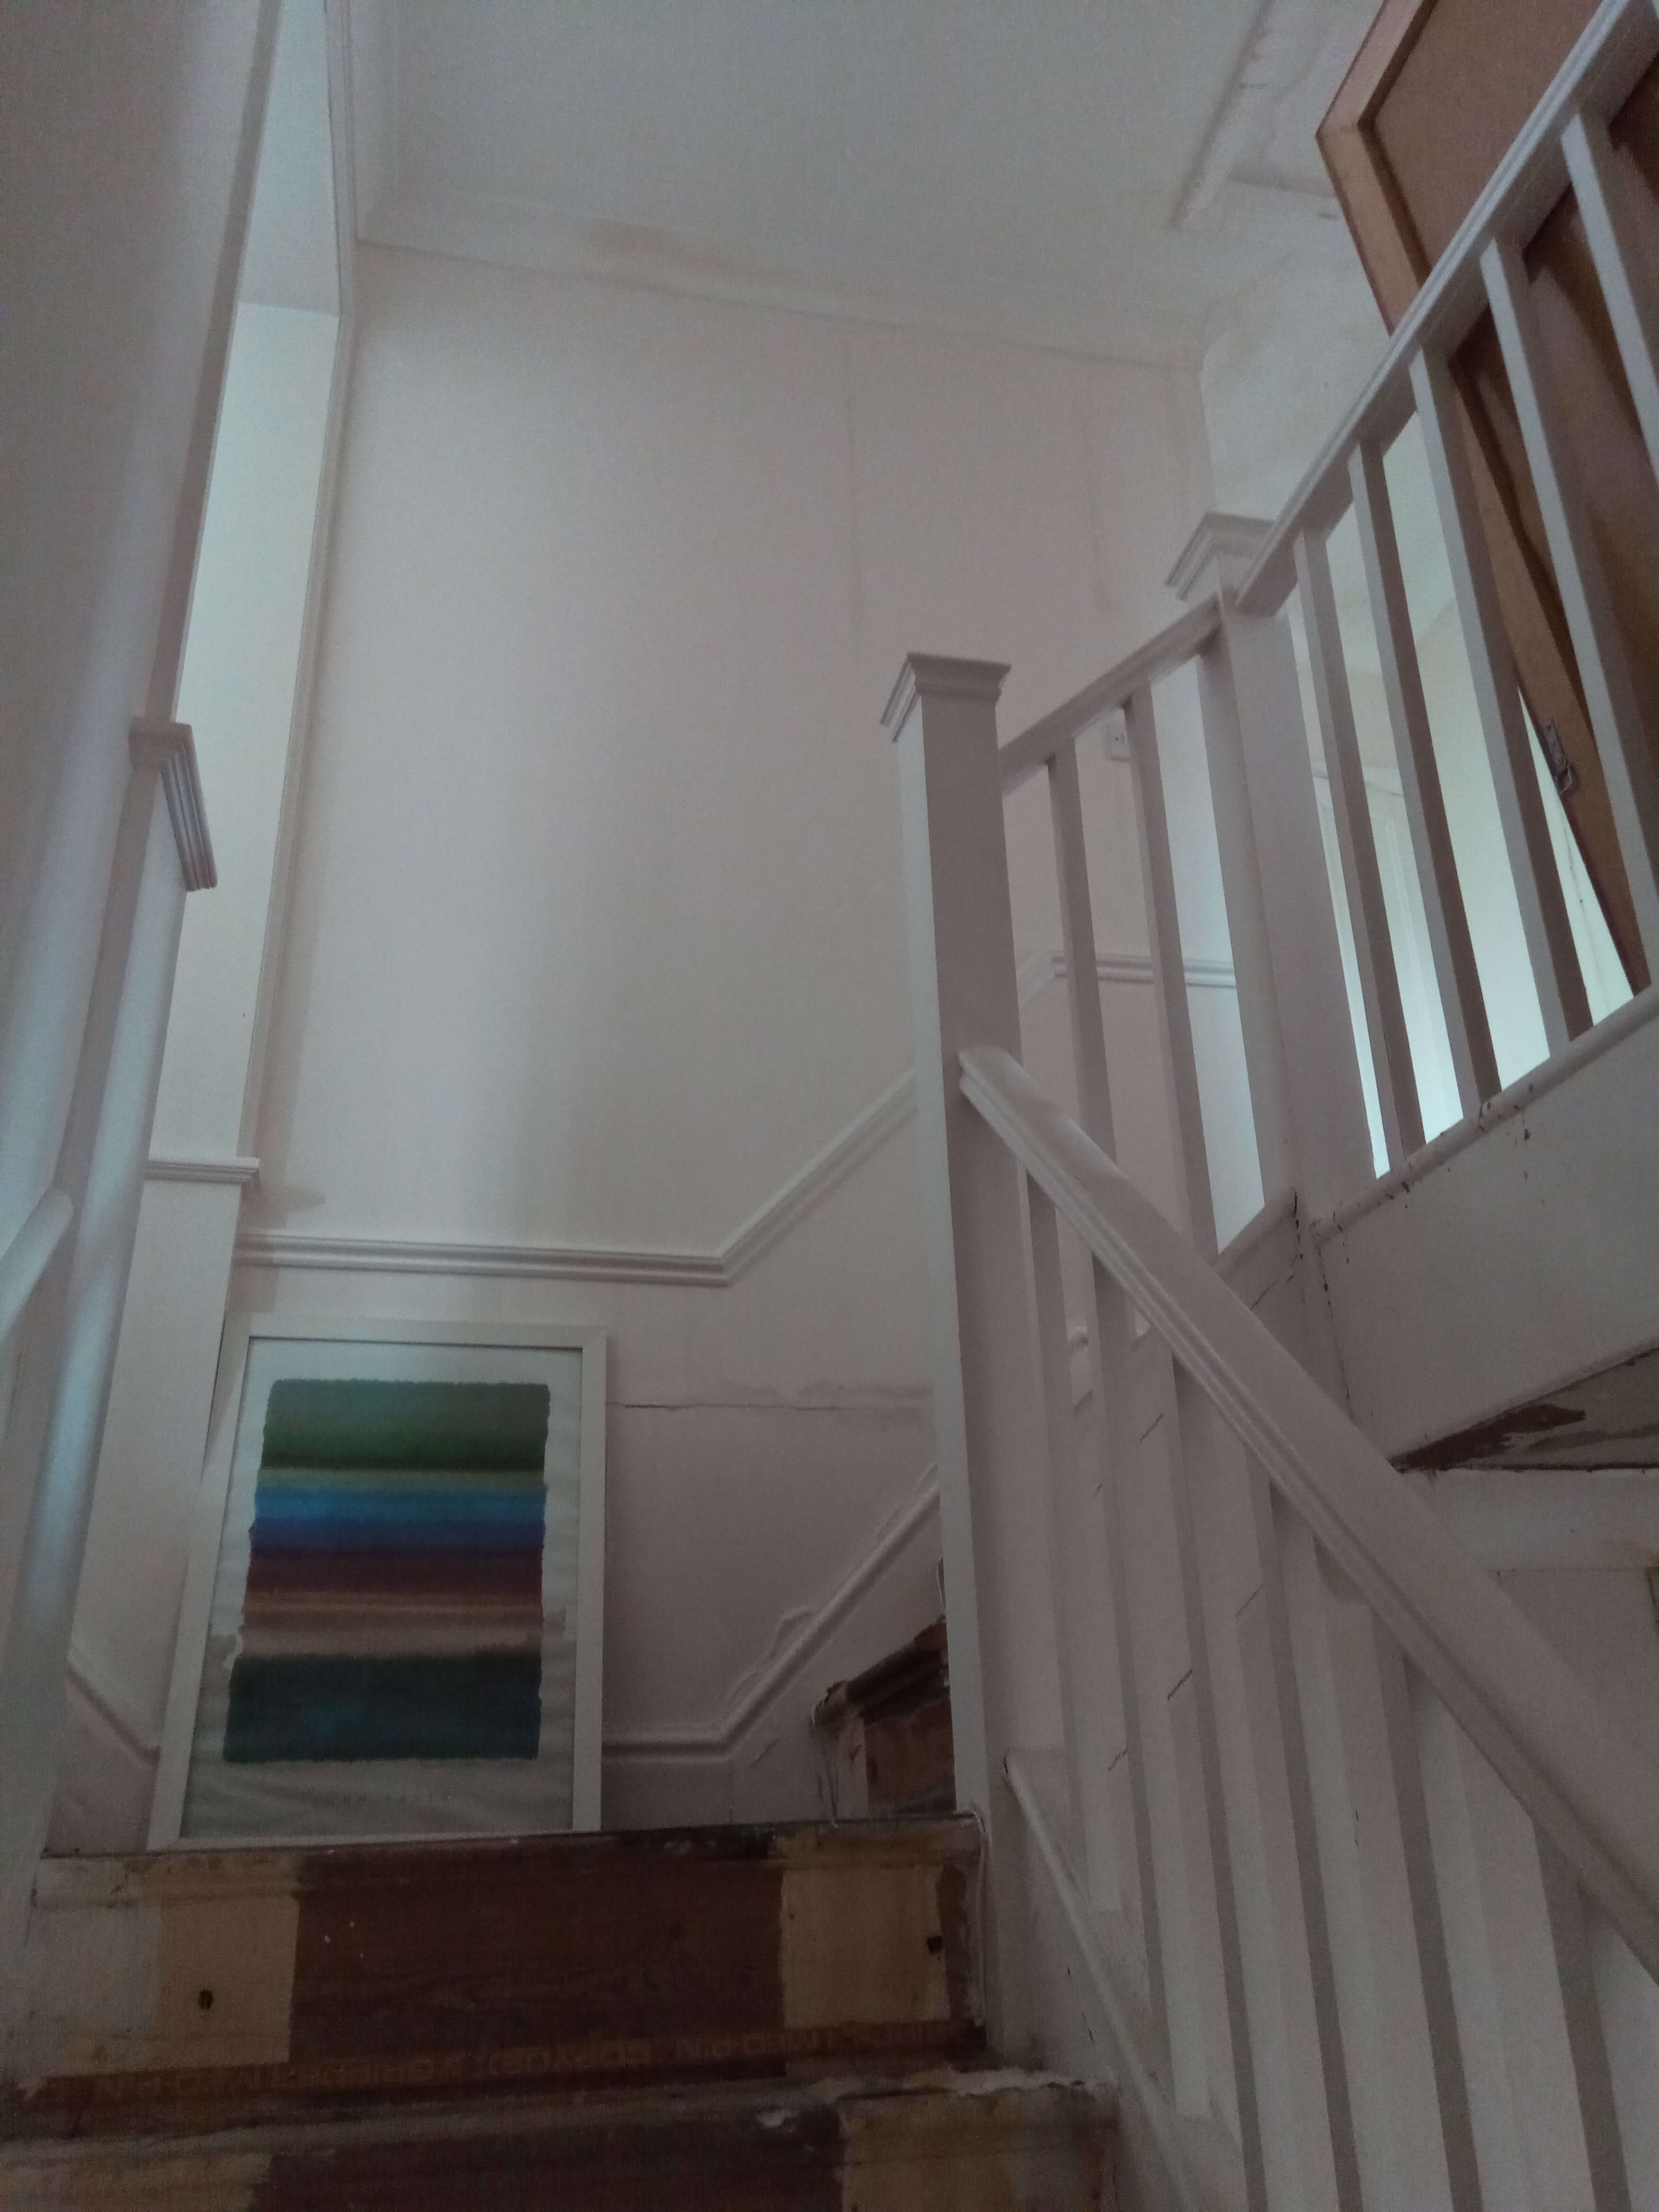 water damage at the top of the staircase